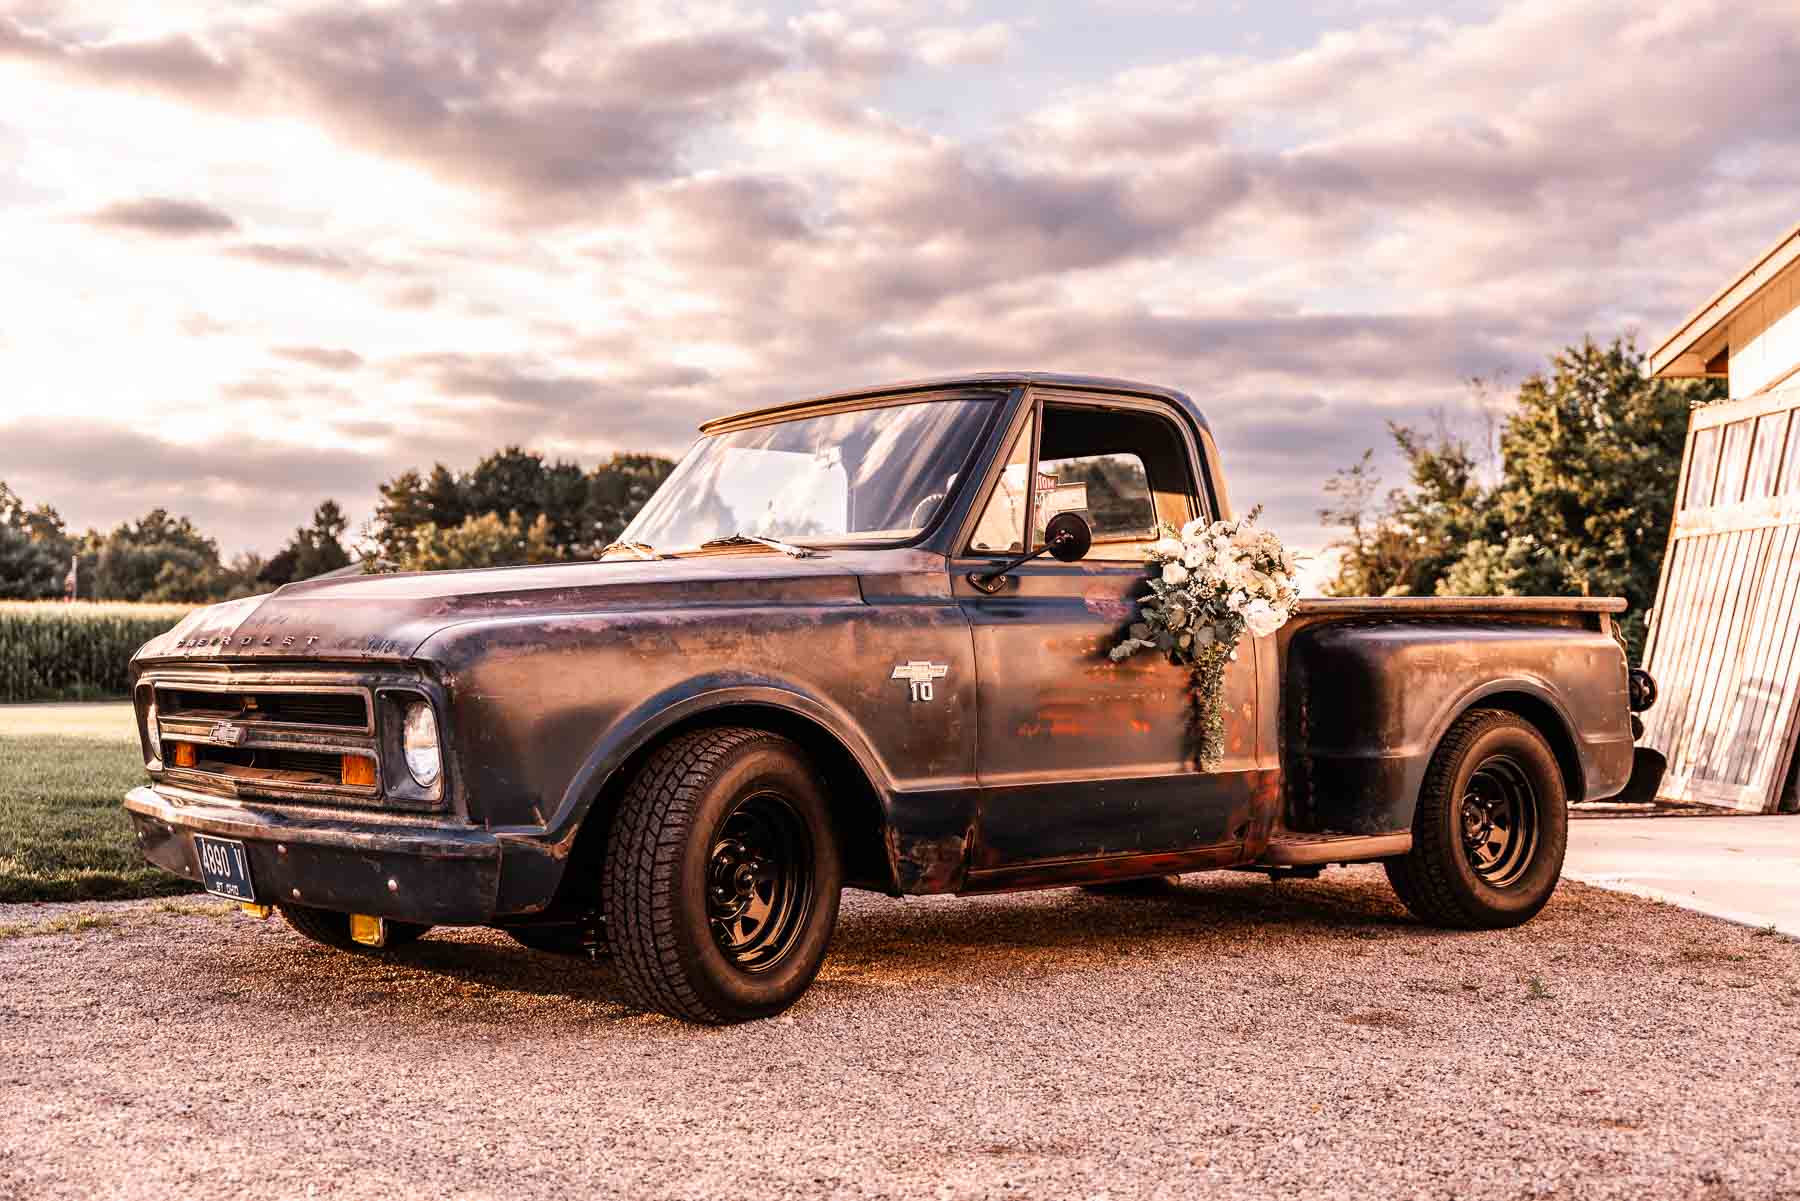 1967 Chevy Truck with Bridal Flowers at wedding